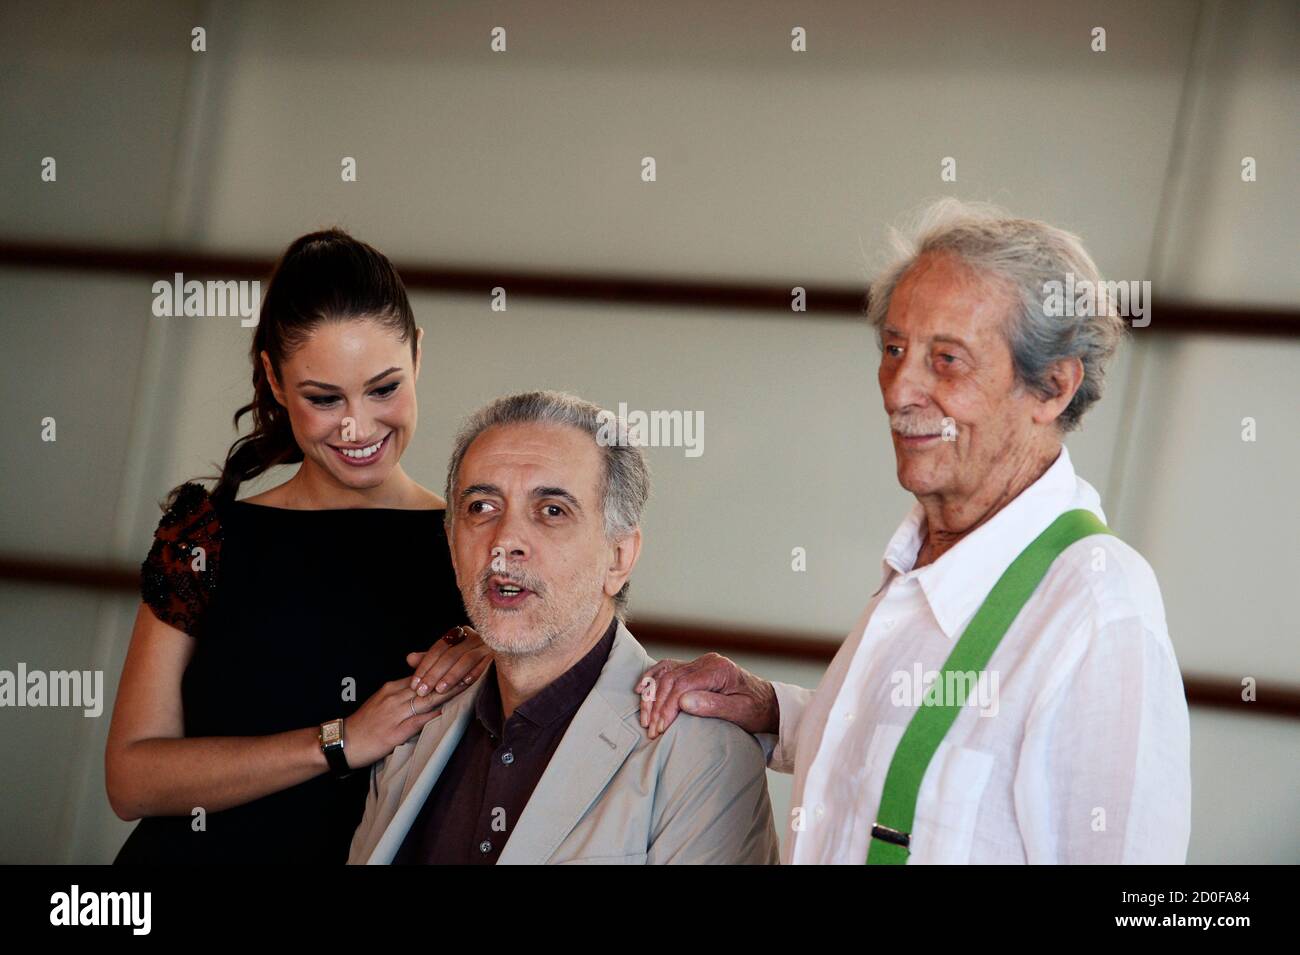 Cast members Aida Folch (L) and Jean Rochefort (R) pose with director Fernando Trueba at a photocall to promote "El Artista y La Modelo" (The artist and the model) at the Kursaal Centre on the fourth day of the San Sebastian Film Festival September 24, 2012. The film is part of the festival's Official Selection. REUTERS/Vincent West (SPAIN - Tags: ENTERTAINMENT) Stock Photo